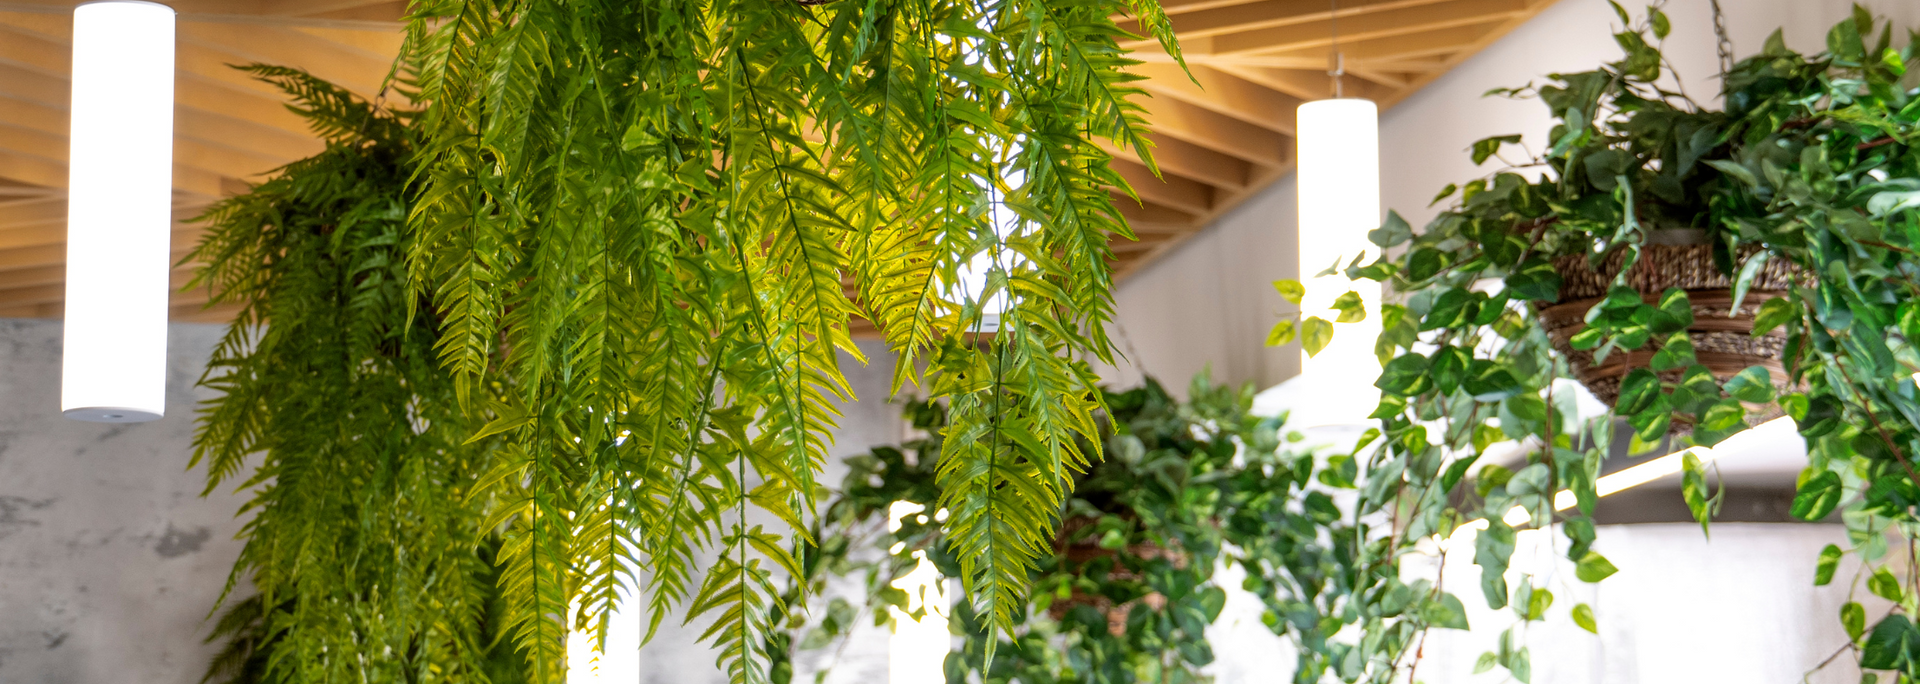 Picture of hanging plants.png
